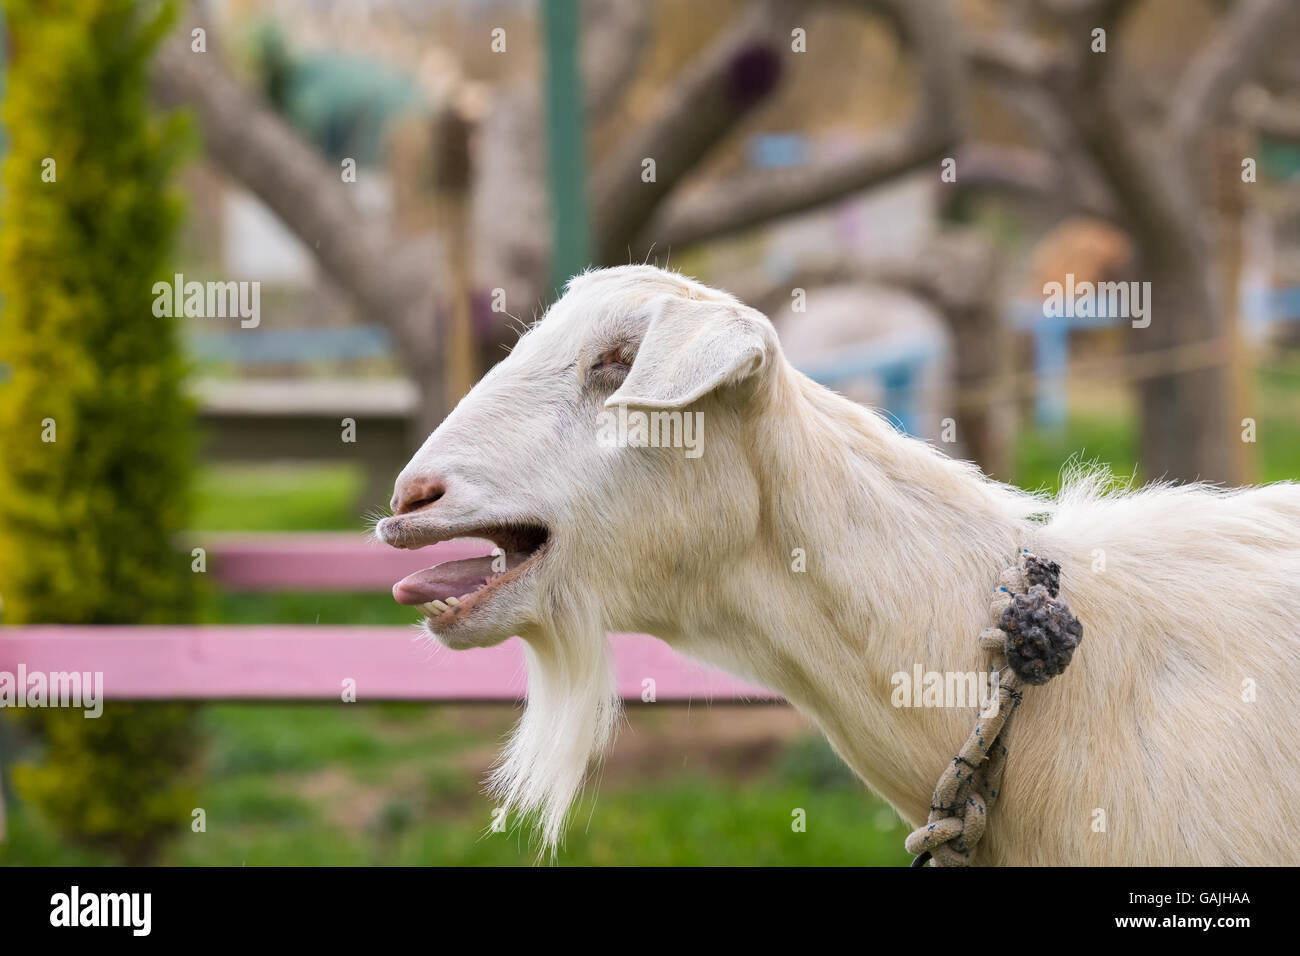 Cute goat bleating. A close up look. Stock Photo